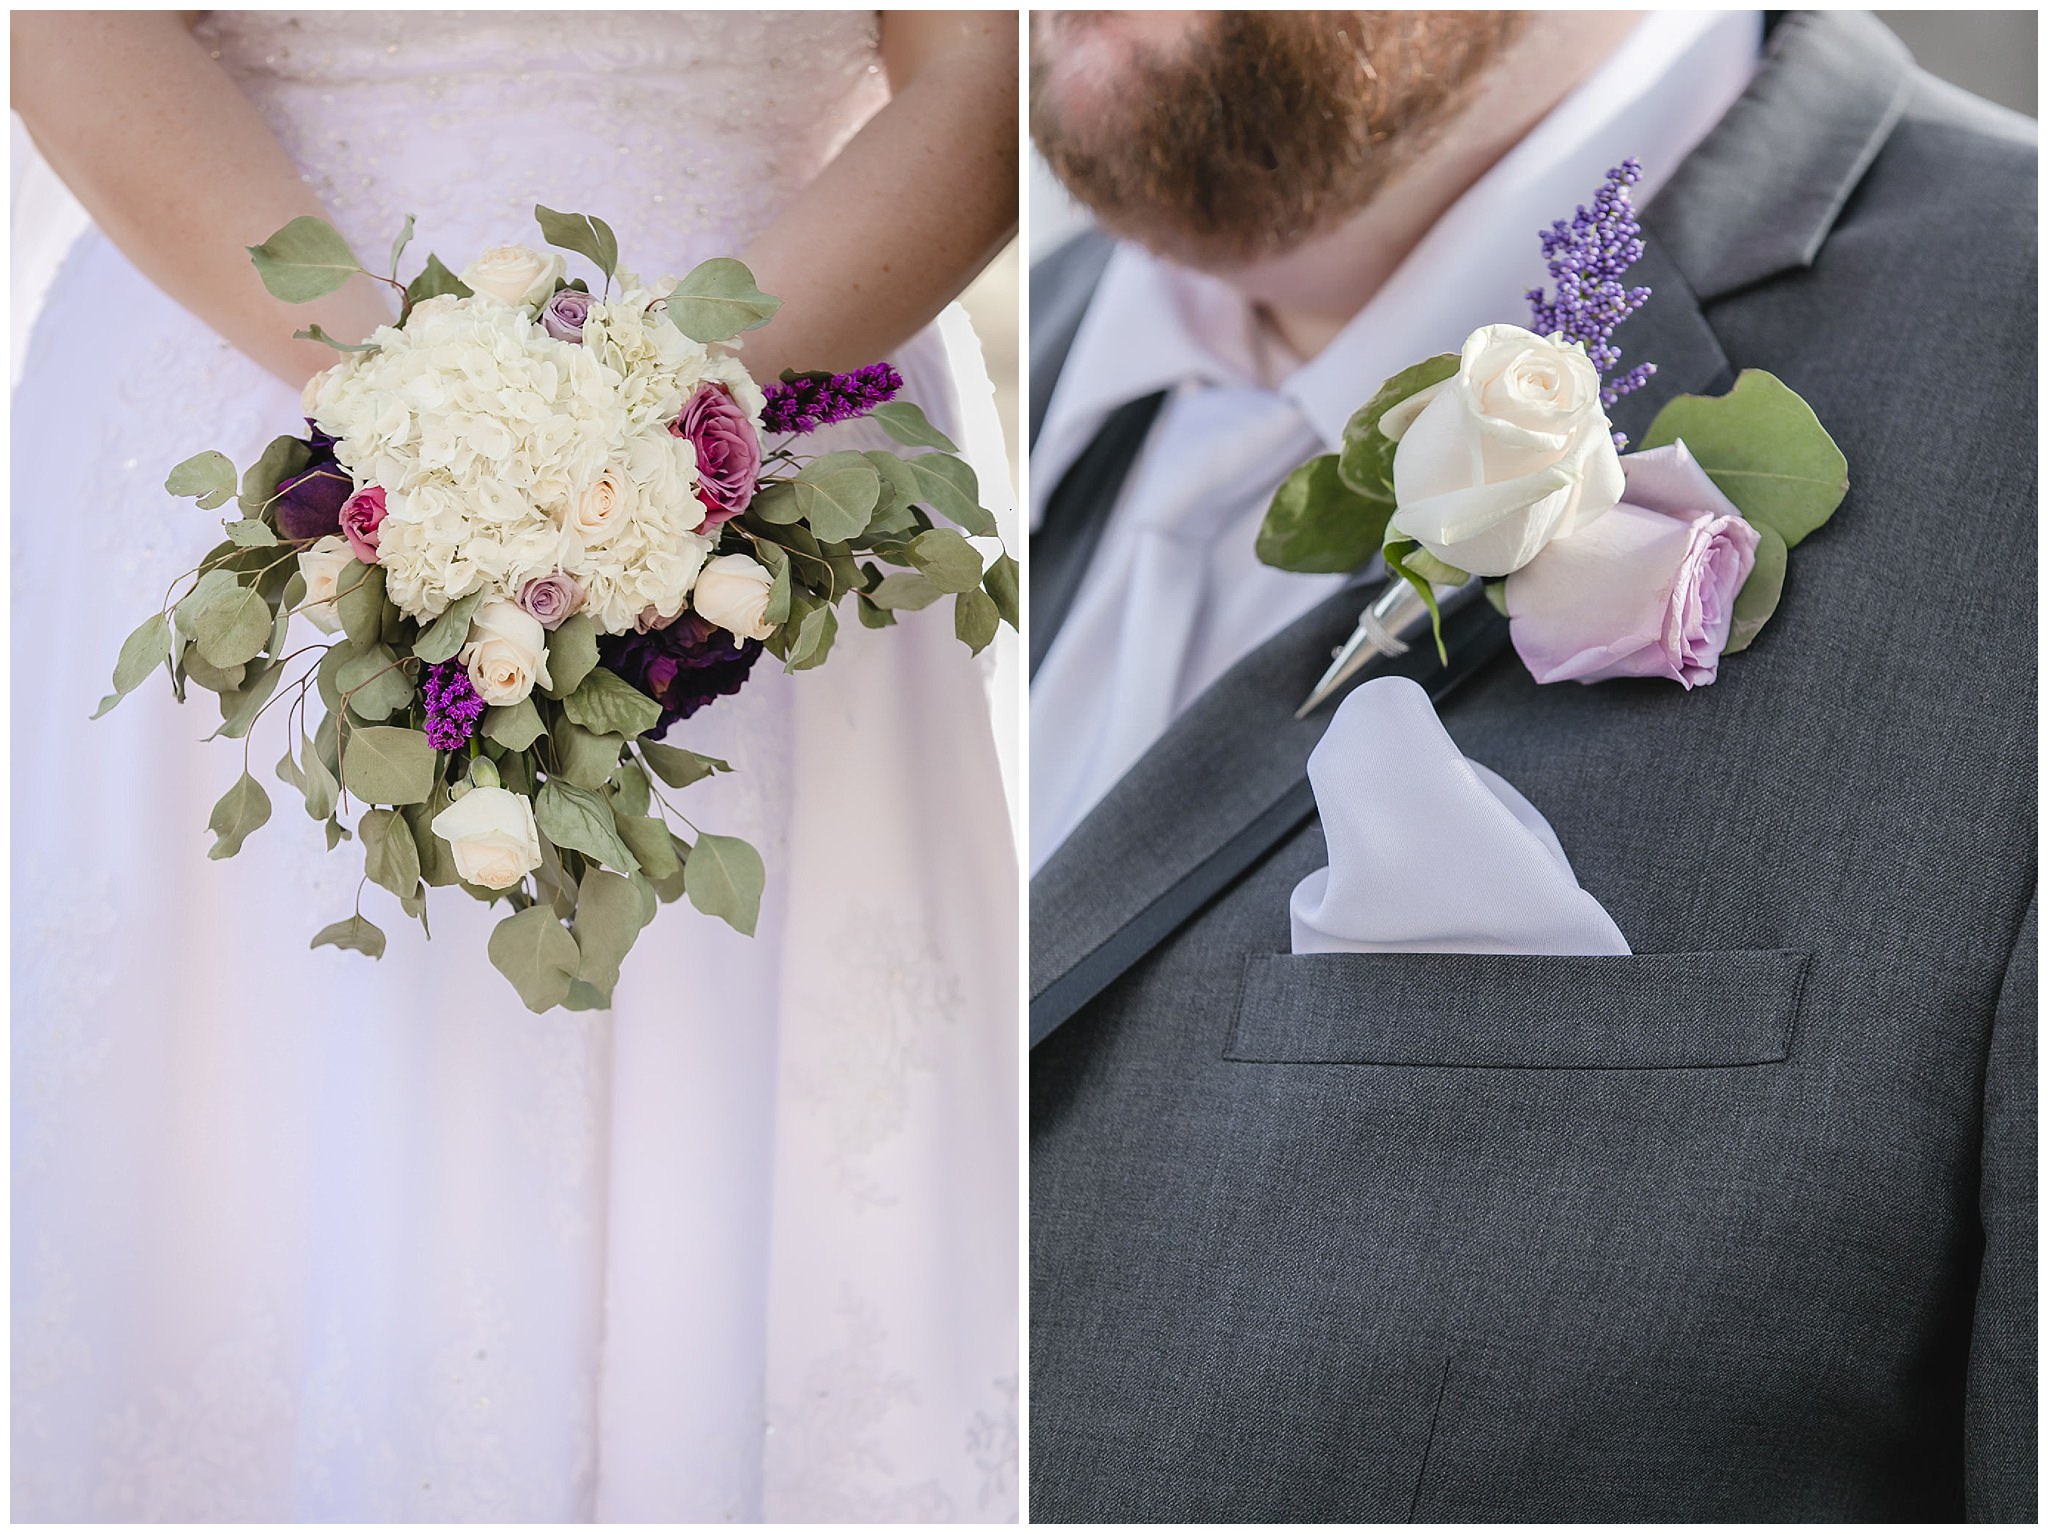 Closeup of bride's bouquet & groom's boutonniere for their spring wedding at the Fez